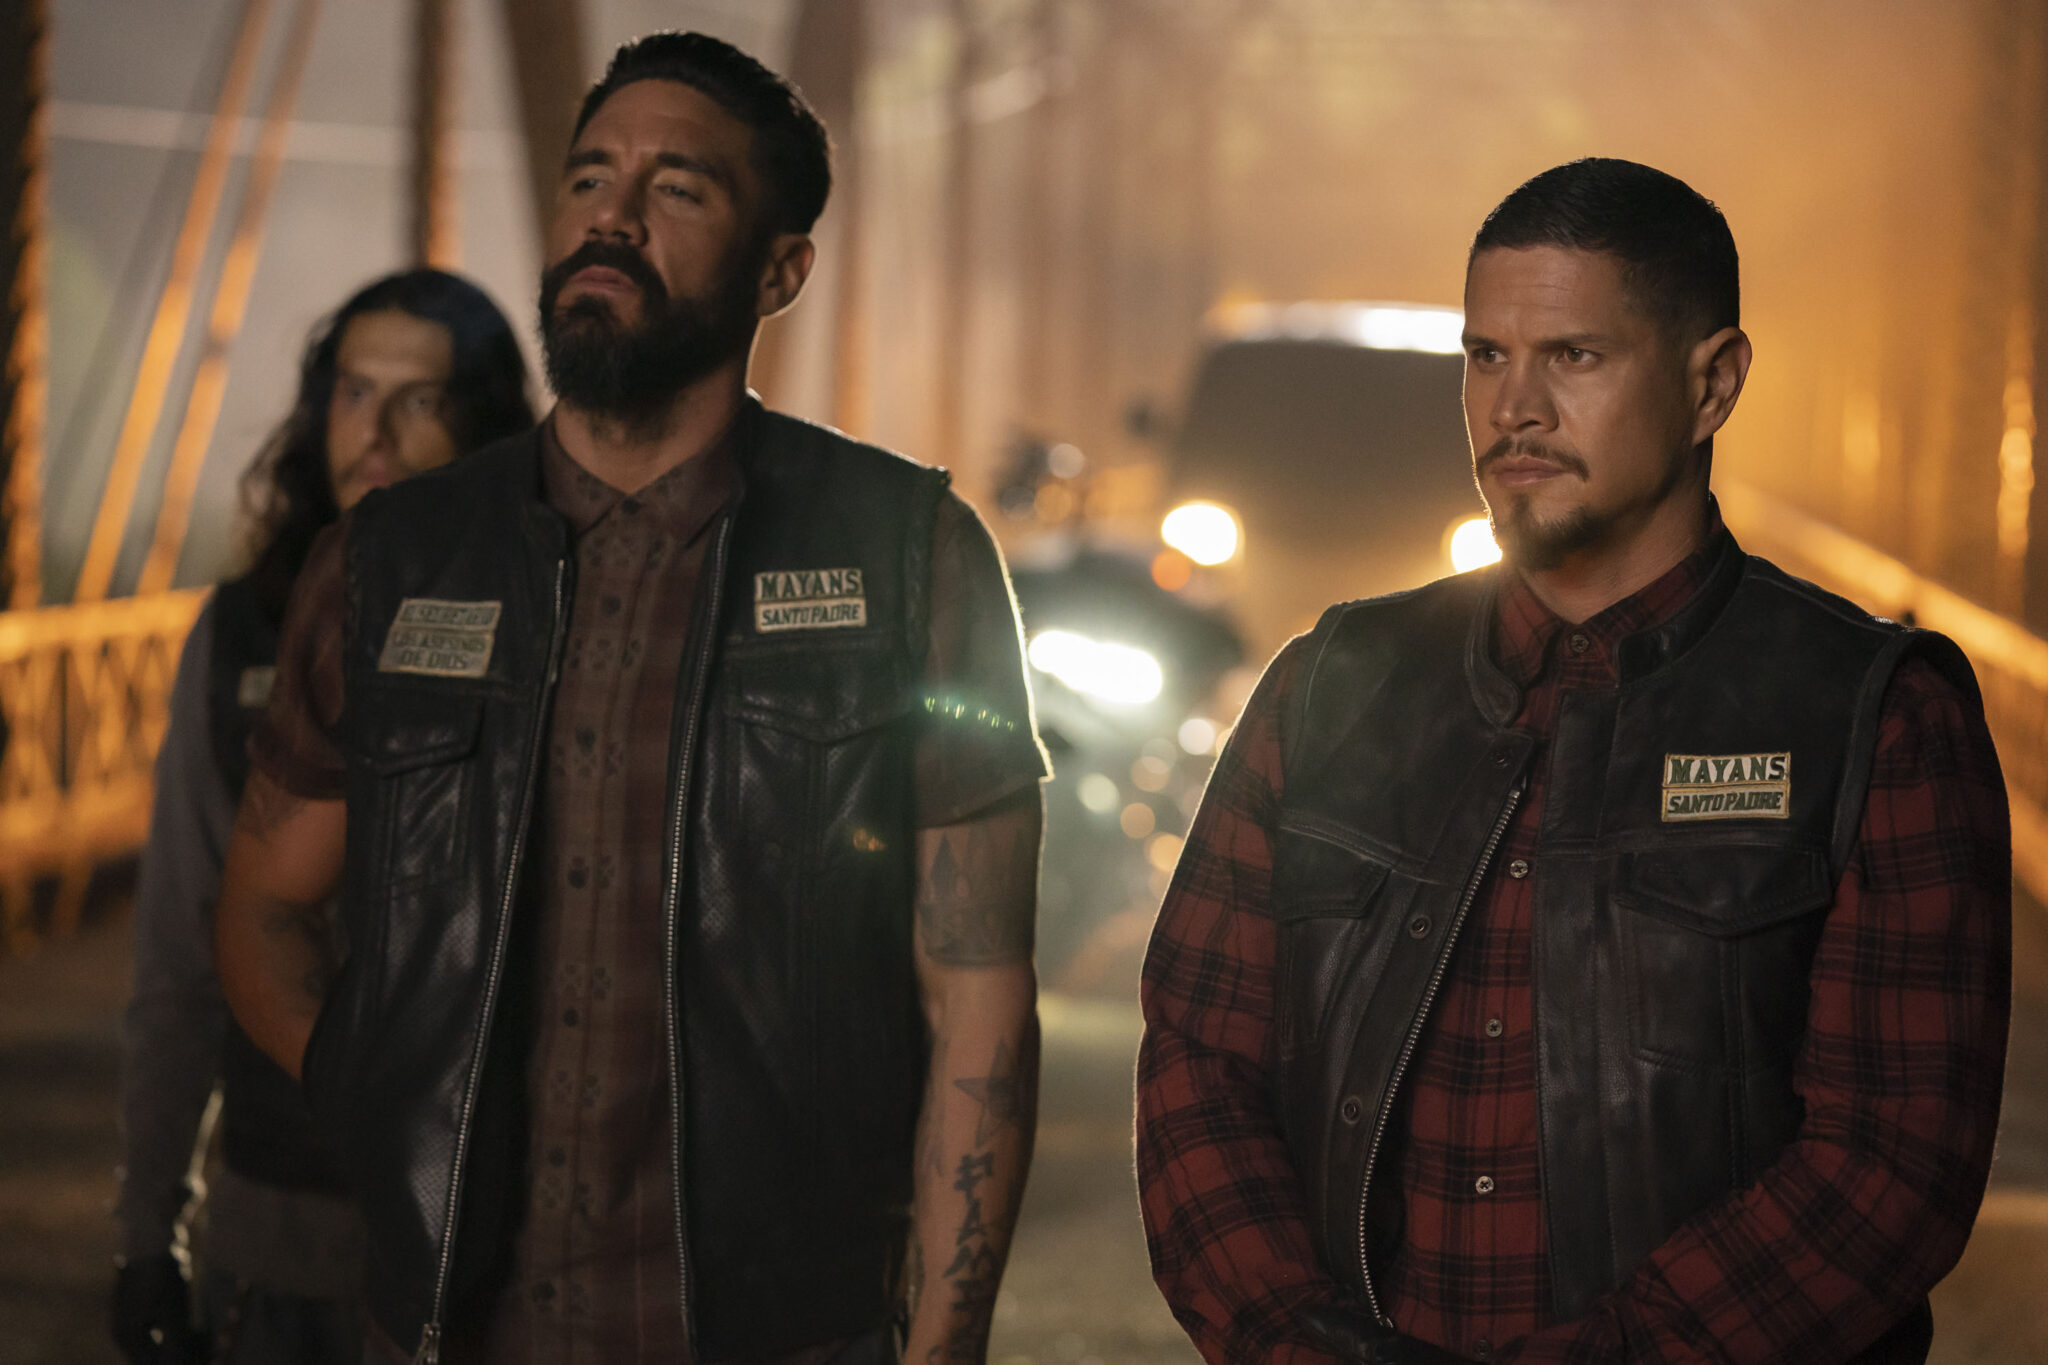 Mayans Season 4 Release Date And Story Latest Updates!